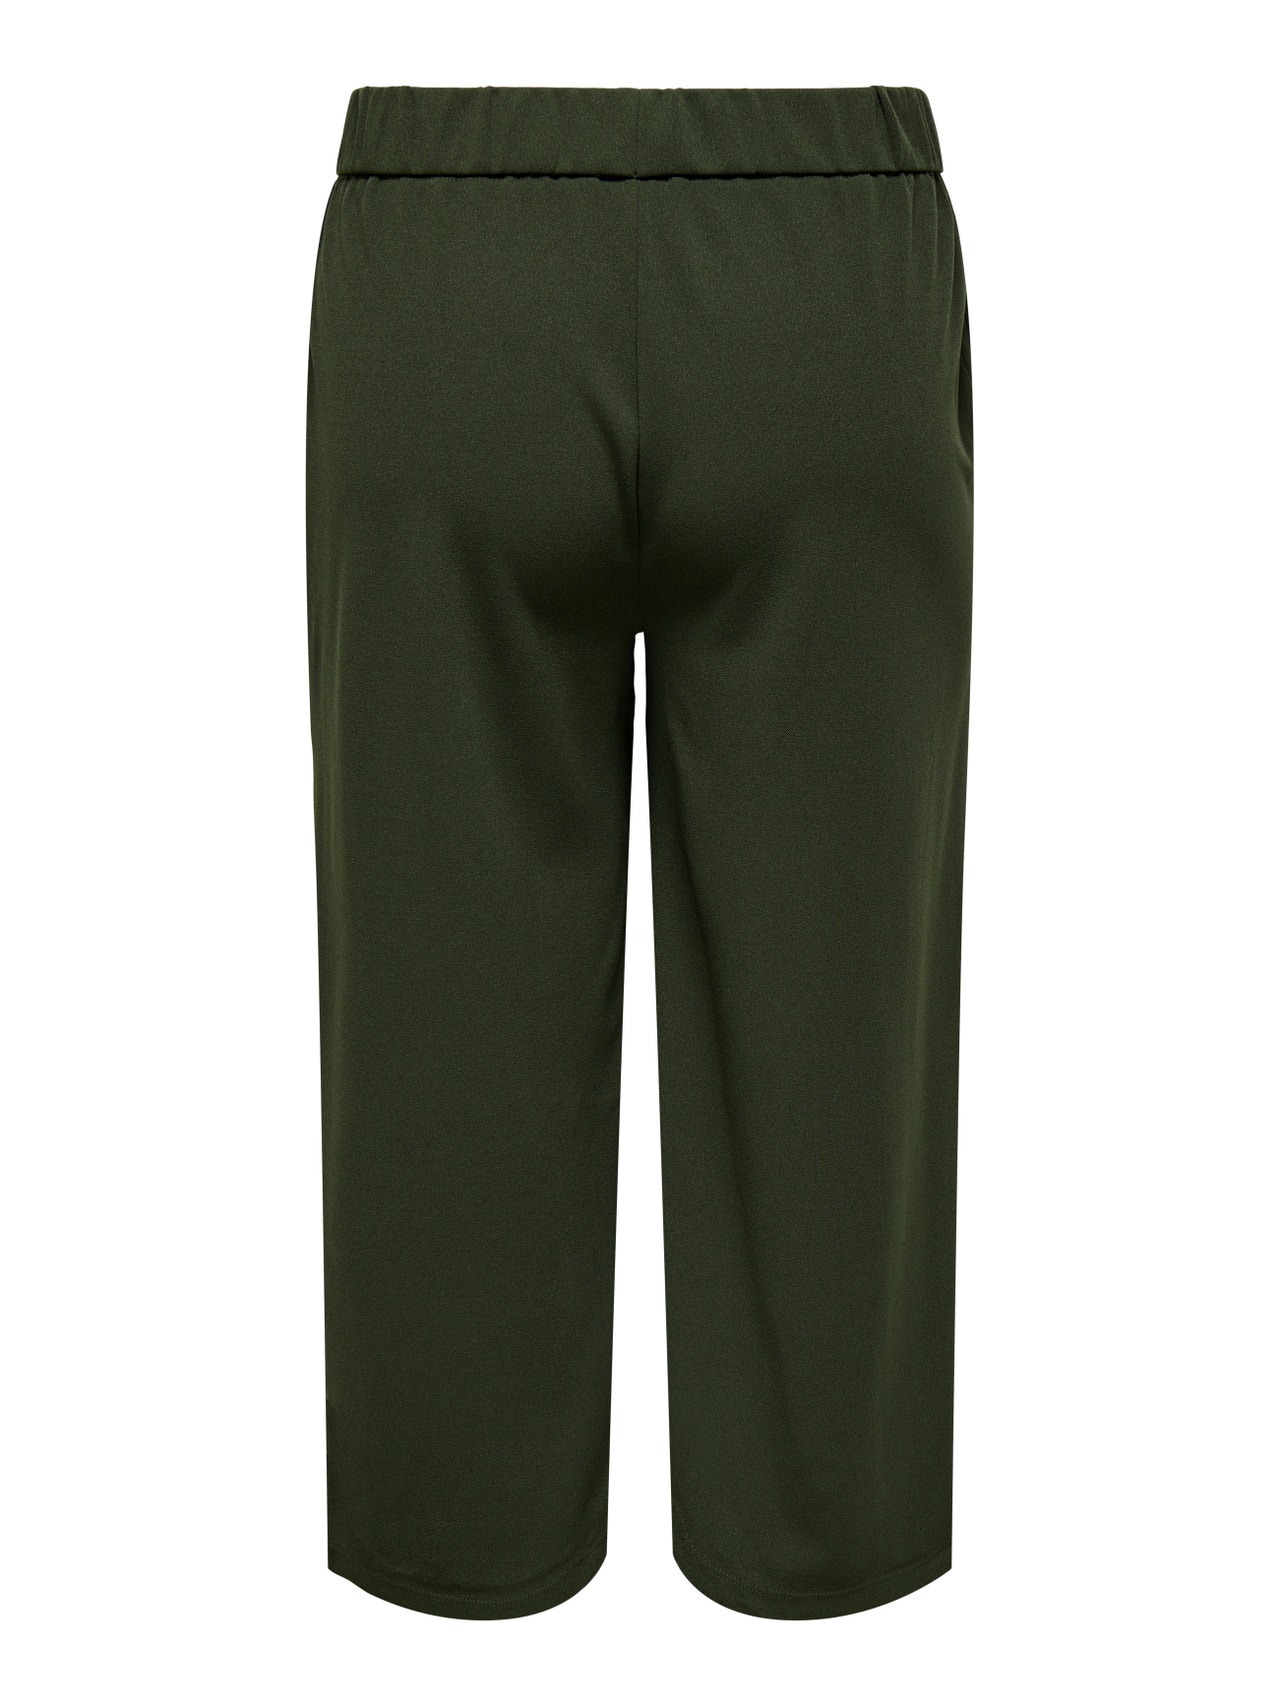 ONLY Curvy culotte trousers -Rosin - 15320125